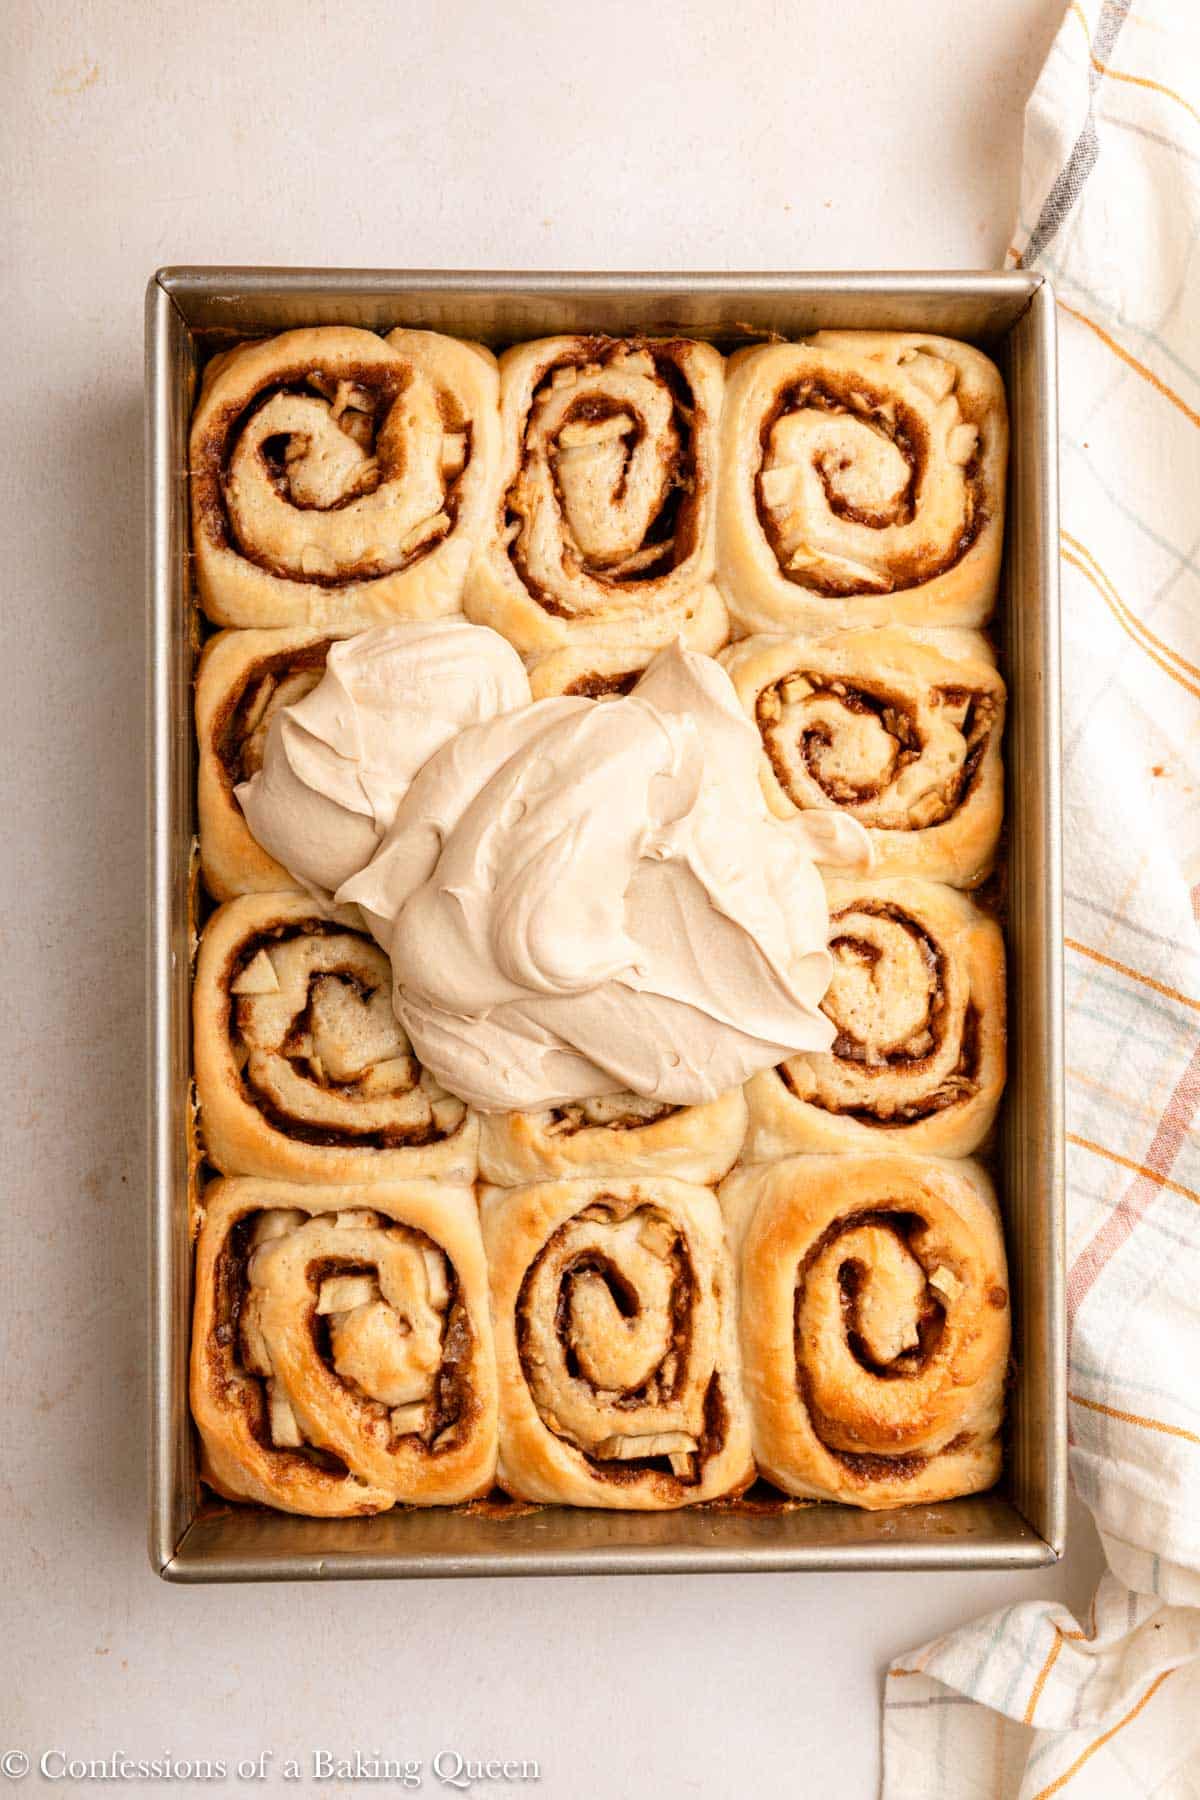 maple frosting on top of apple cinnamon rolls in a metal pan on a light surface with a light colored linen.